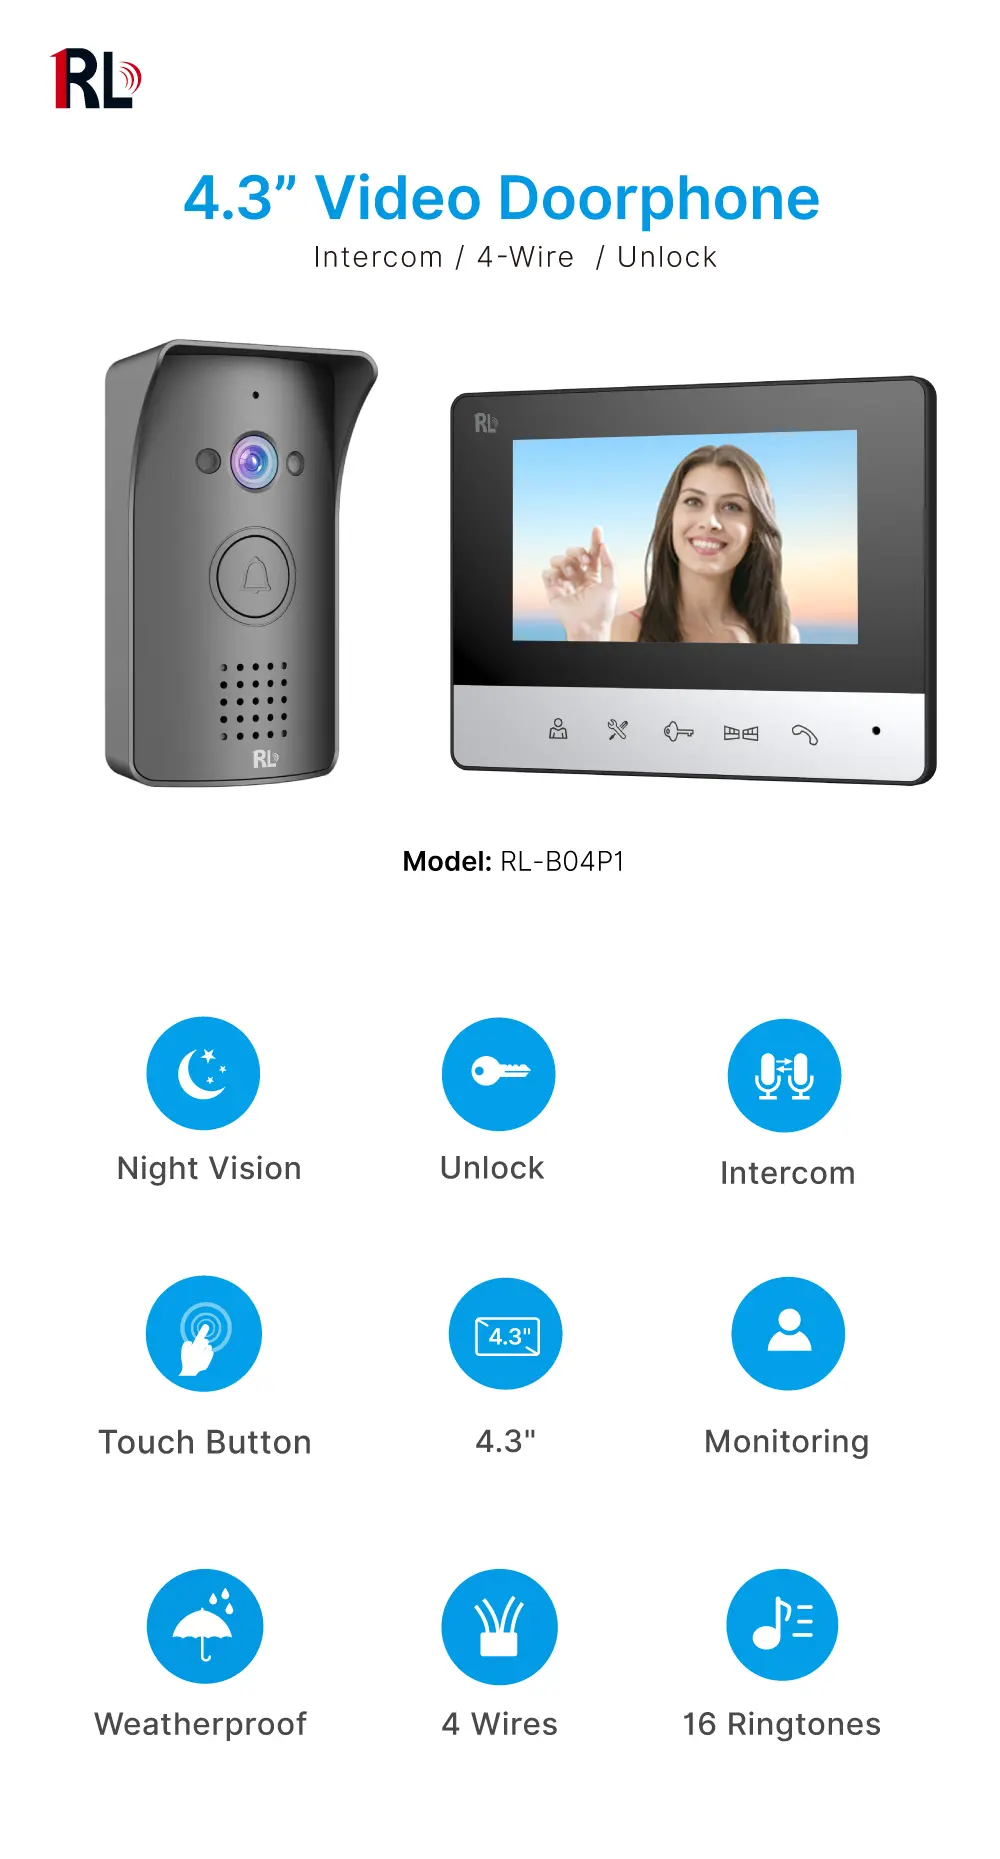 4.3” Video Doorphone #RL-B04P1--4.3 inch TFT screen with widescreen images and no radiation, low power consumption but high defifinition. _01